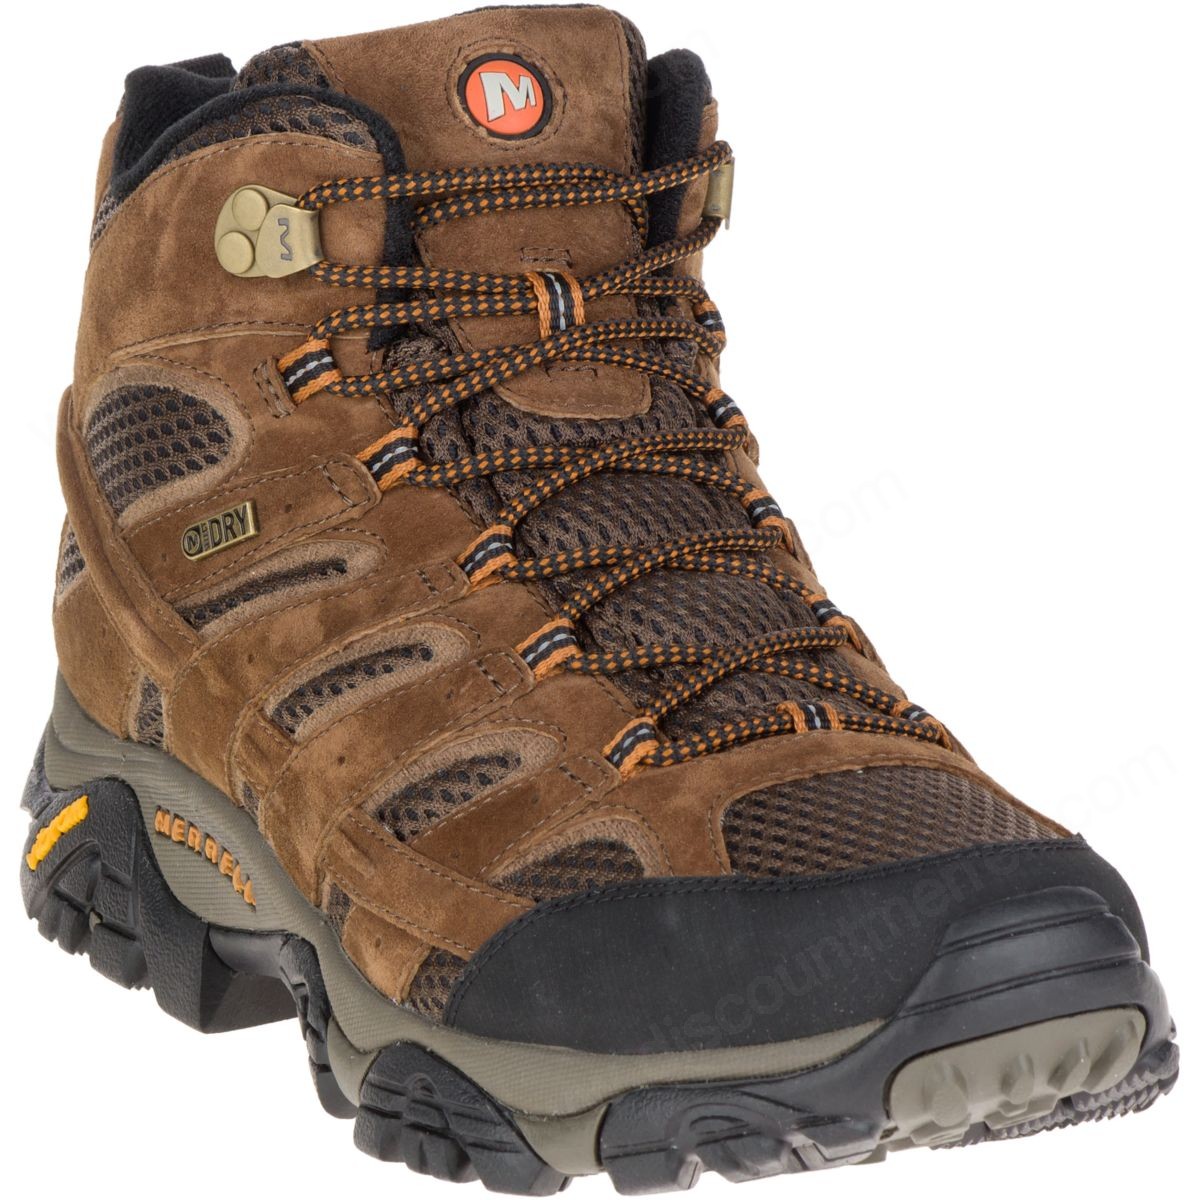 Merrell Man's Moab Mother Of All Boots™ Mid Waterproof Earth - -3